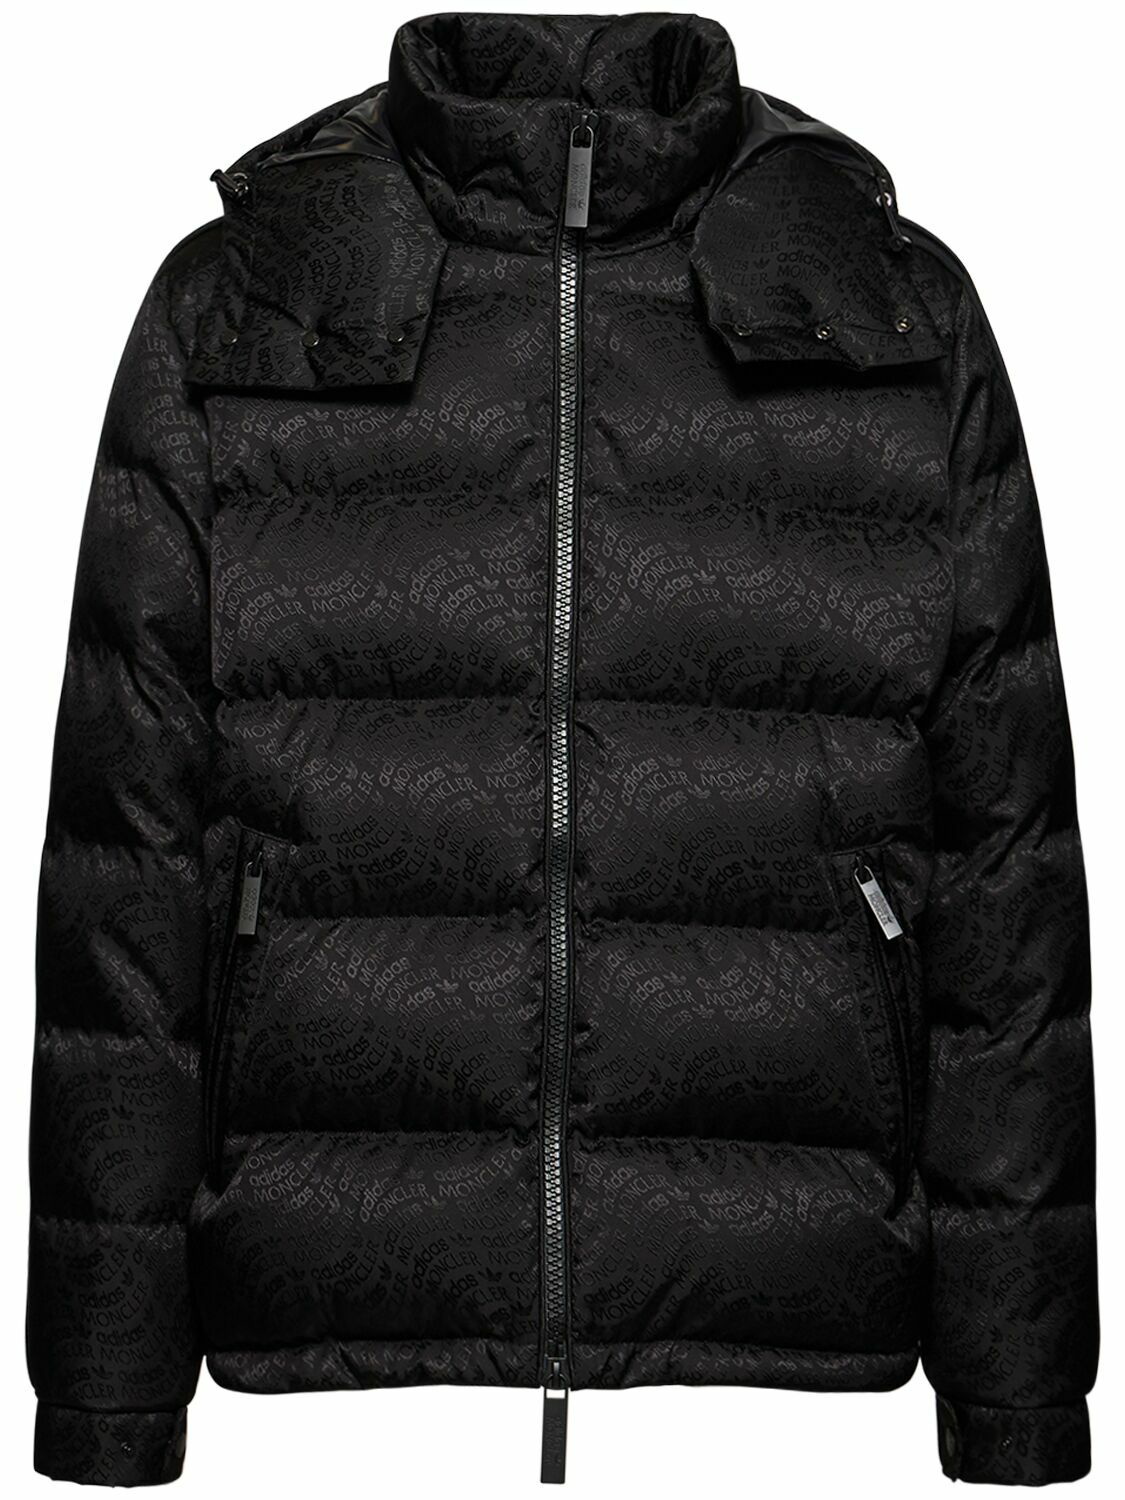 Moncler Genius - 2 Moncler 1952 Amedras Quilted Nylon-Ripstop Down 